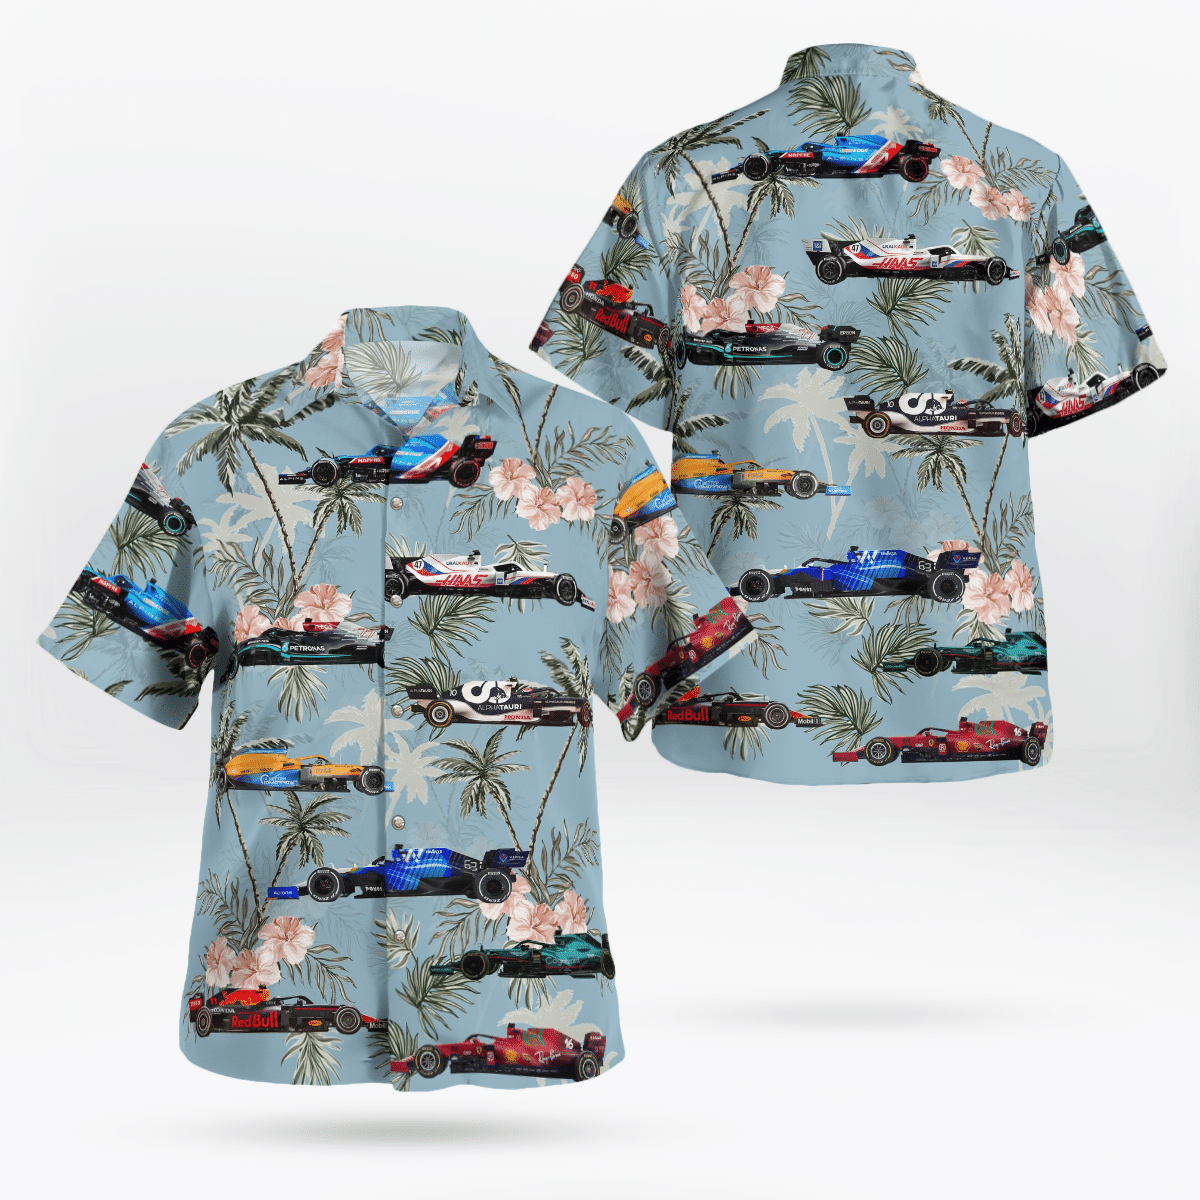 If you are in need of a new summertime look, pick up this Hawaiian shirt 115